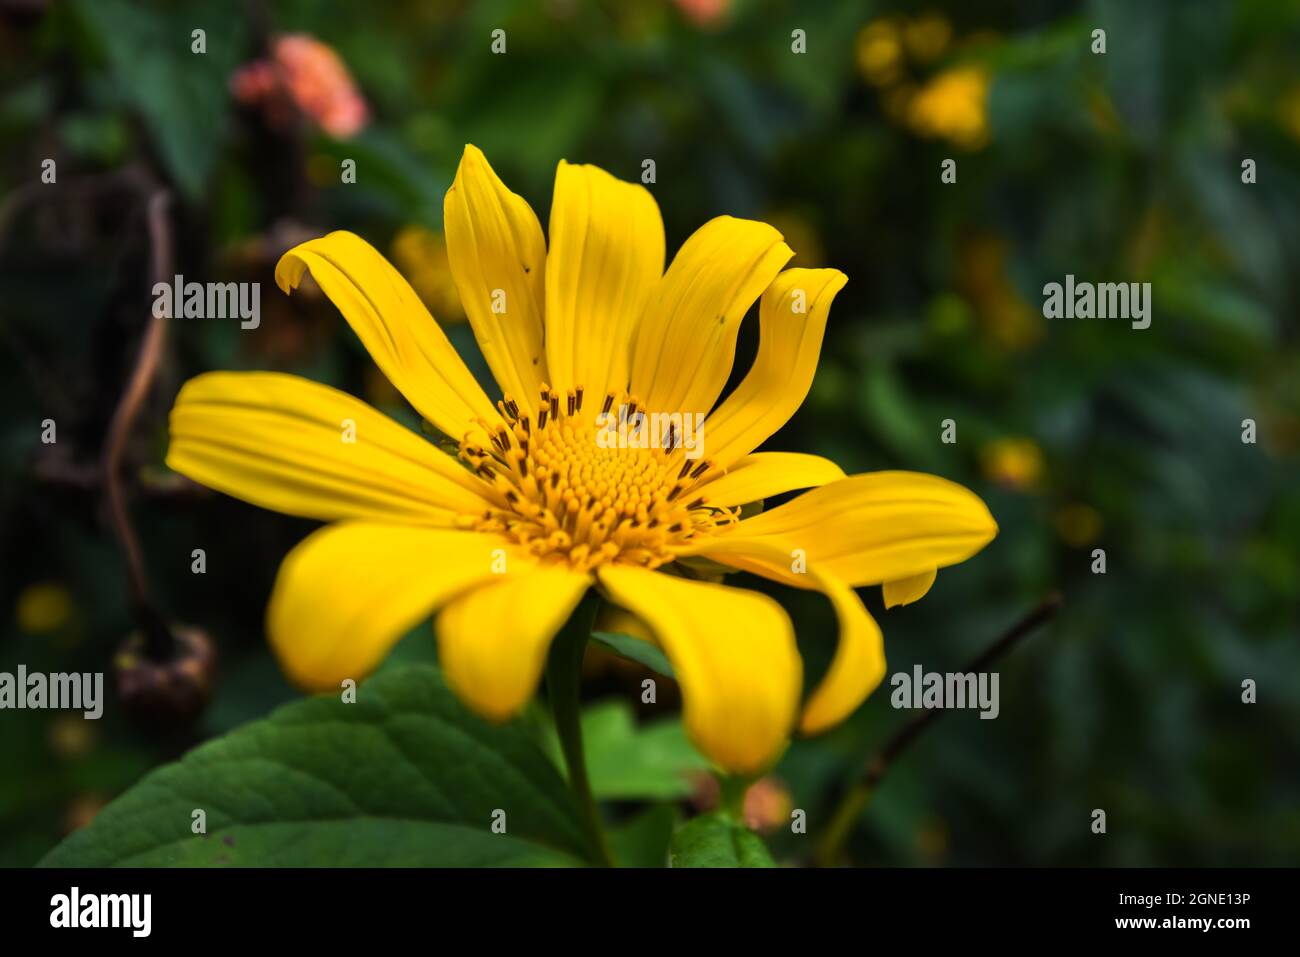 Wild sunflowers are blooming in the city of thousands of flowers in Da Lat, Viet Nam Stock Photo